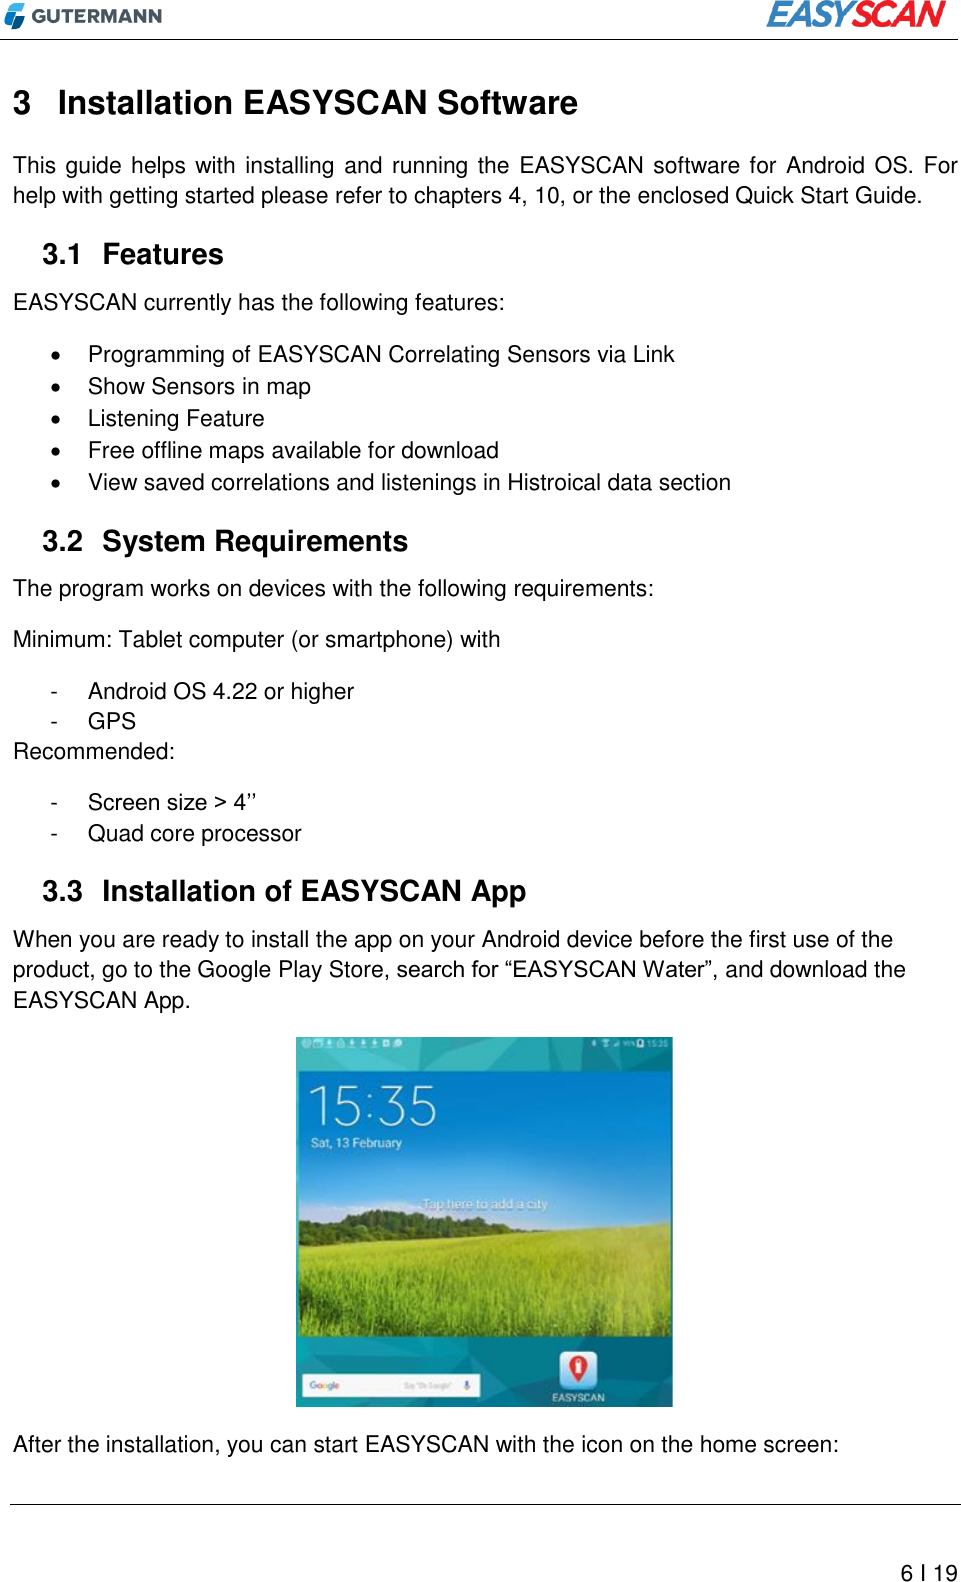          6 I 19 3  Installation EASYSCAN Software This guide helps with installing and running the EASYSCAN software for Android OS. For help with getting started please refer to chapters 4, 10, or the enclosed Quick Start Guide.  3.1  Features EASYSCAN currently has the following features:   Programming of EASYSCAN Correlating Sensors via Link   Show Sensors in map   Listening Feature   Free offline maps available for download   View saved correlations and listenings in Histroical data section 3.2  System Requirements The program works on devices with the following requirements: Minimum: Tablet computer (or smartphone) with -  Android OS 4.22 or higher -  GPS Recommended:  -  Screen size &gt; 4’’ -  Quad core processor 3.3  Installation of EASYSCAN App When you are ready to install the app on your Android device before the first use of the product, go to the Google Play Store, search for “EASYSCAN Water”, and download the EASYSCAN App.  After the installation, you can start EASYSCAN with the icon on the home screen: 